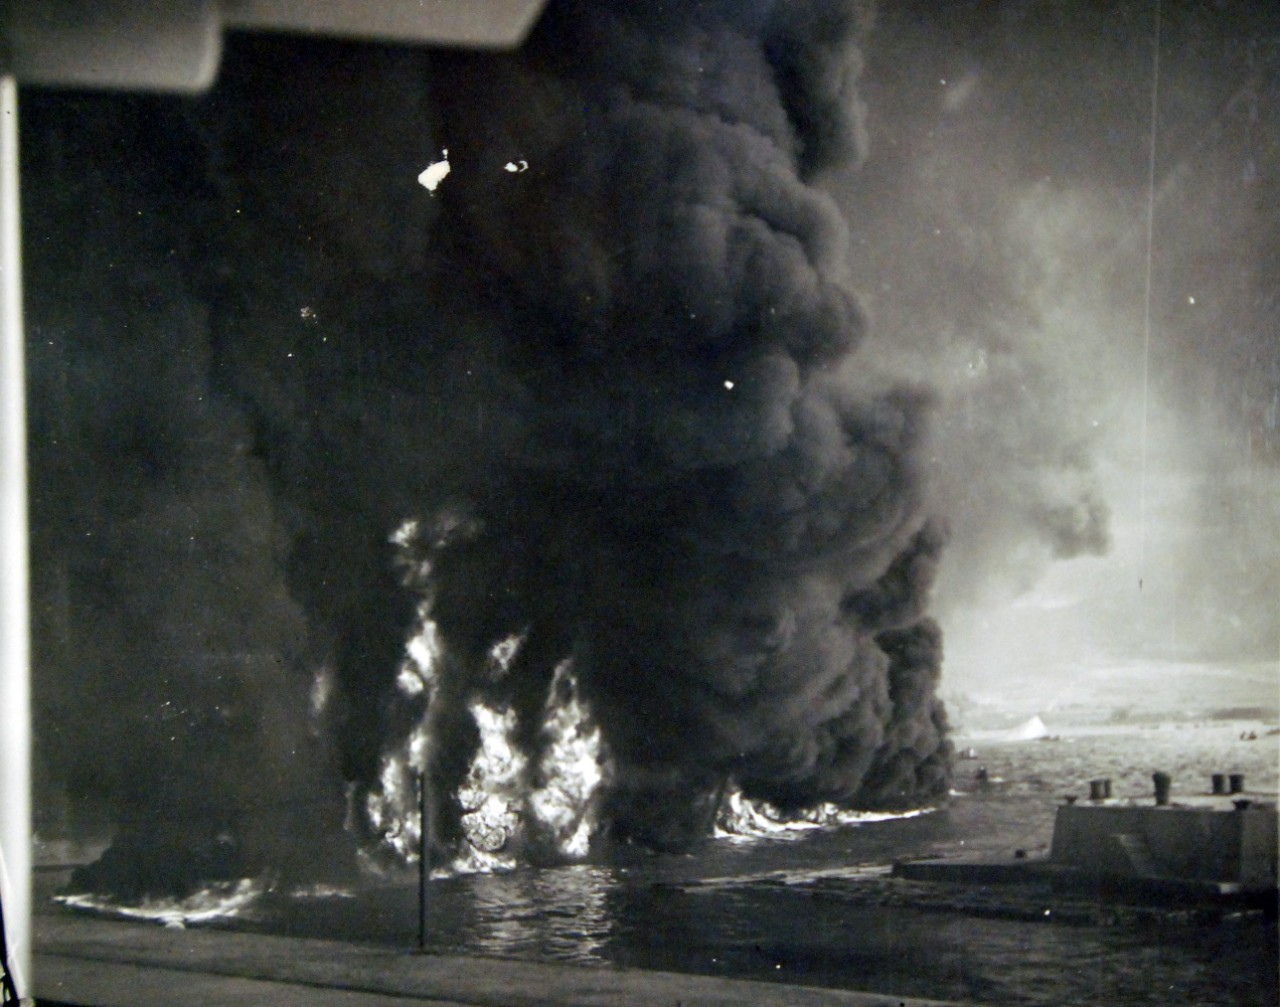 80-G-32579:  Japanese Attack on Pearl Harbor, December 7, 1941.   Oil burning on water near Naval Air Station boat landing after the Japanese raid on Pearl Harbor, Territory of Hawaii.  Official U.S. Navy photograph, now in the collections of the National Archives.     (7/2/2014).